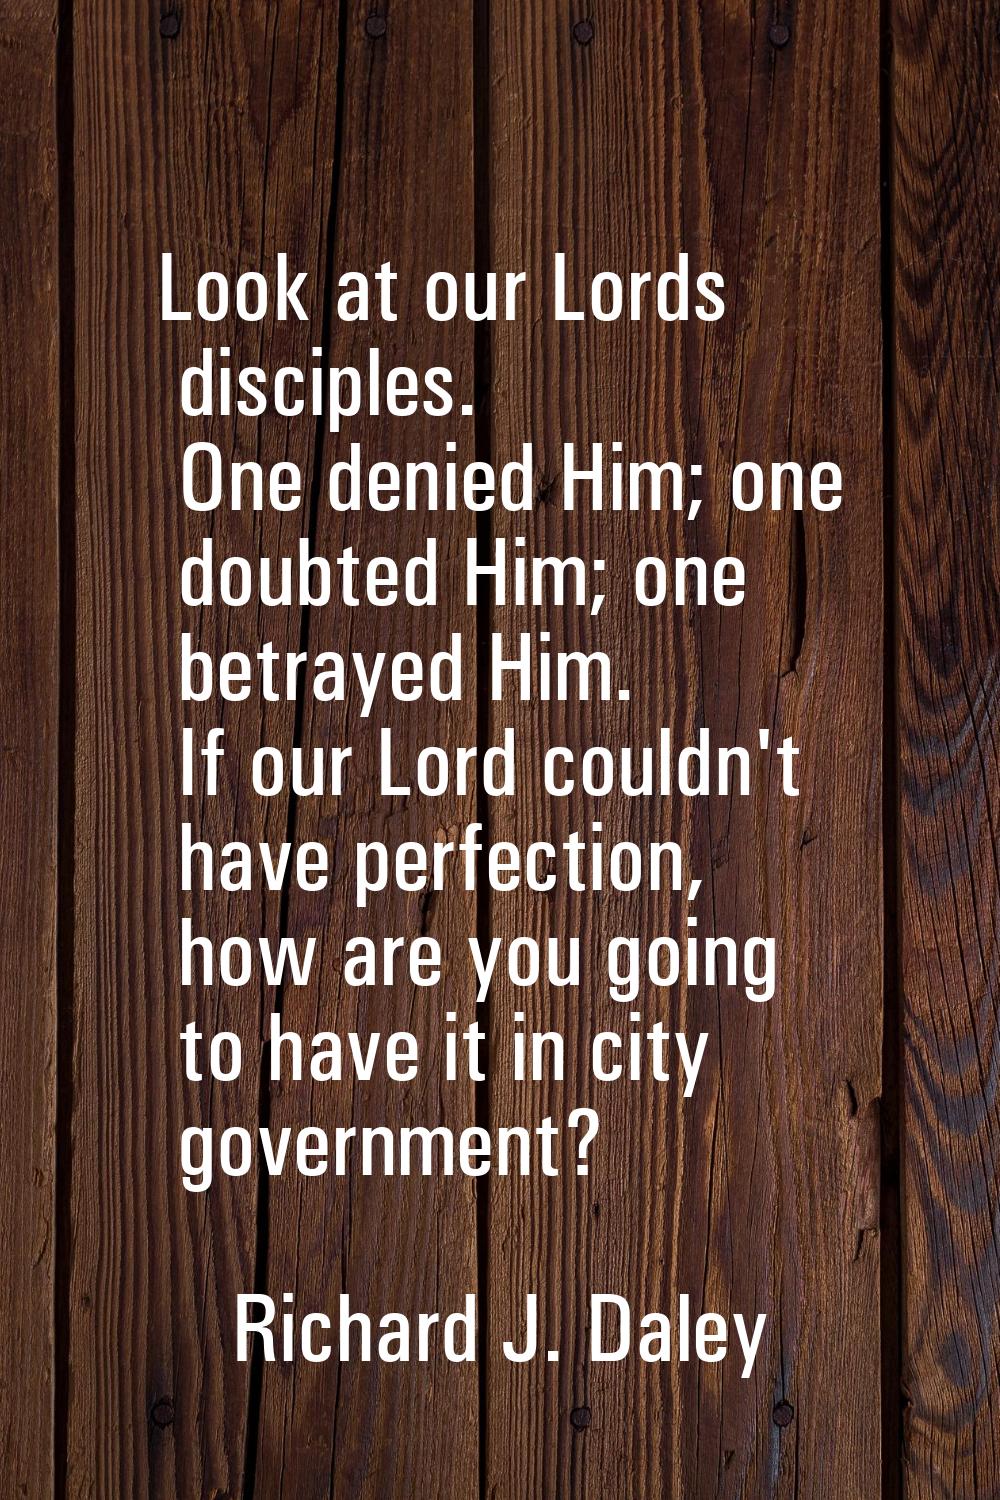 Look at our Lords disciples. One denied Him; one doubted Him; one betrayed Him. If our Lord couldn'